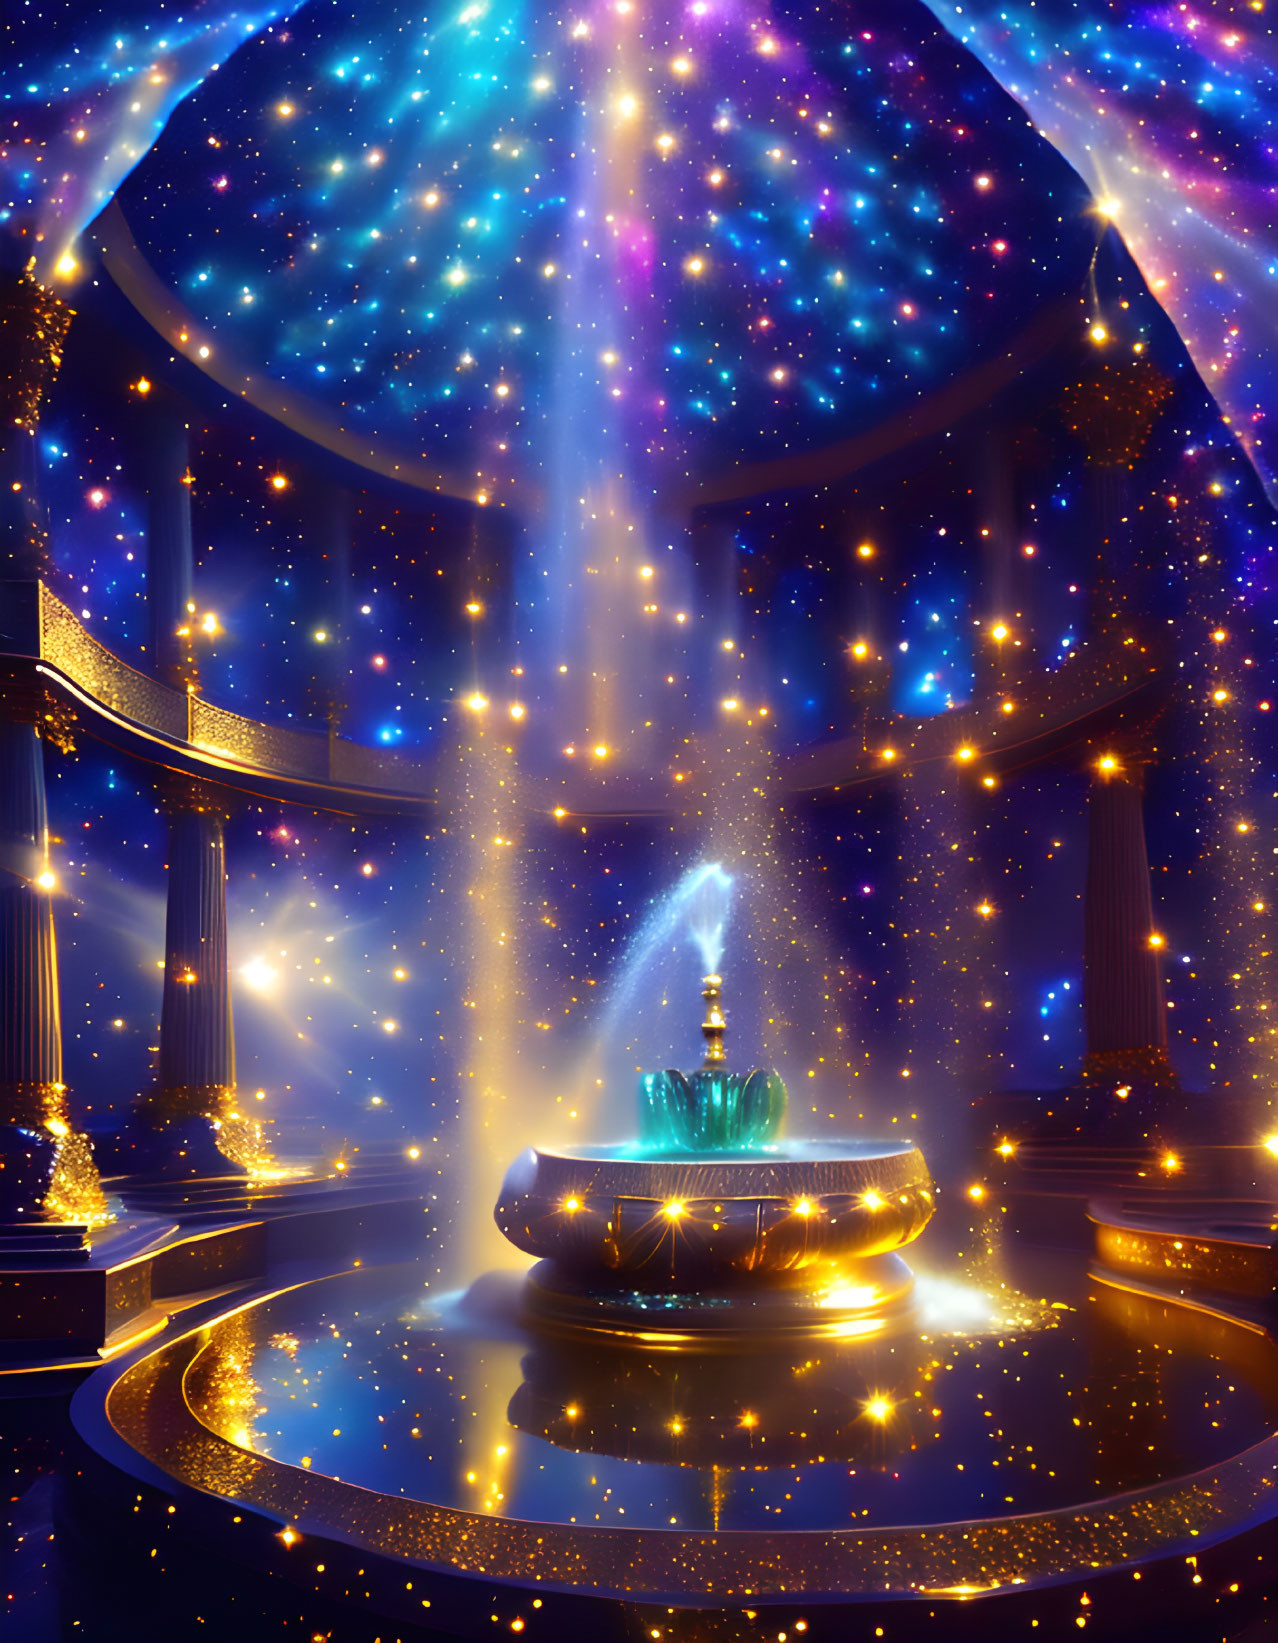 Fantastical indoor scene with star-filled dome ceiling, fountain, classical columns, and celestial motifs.